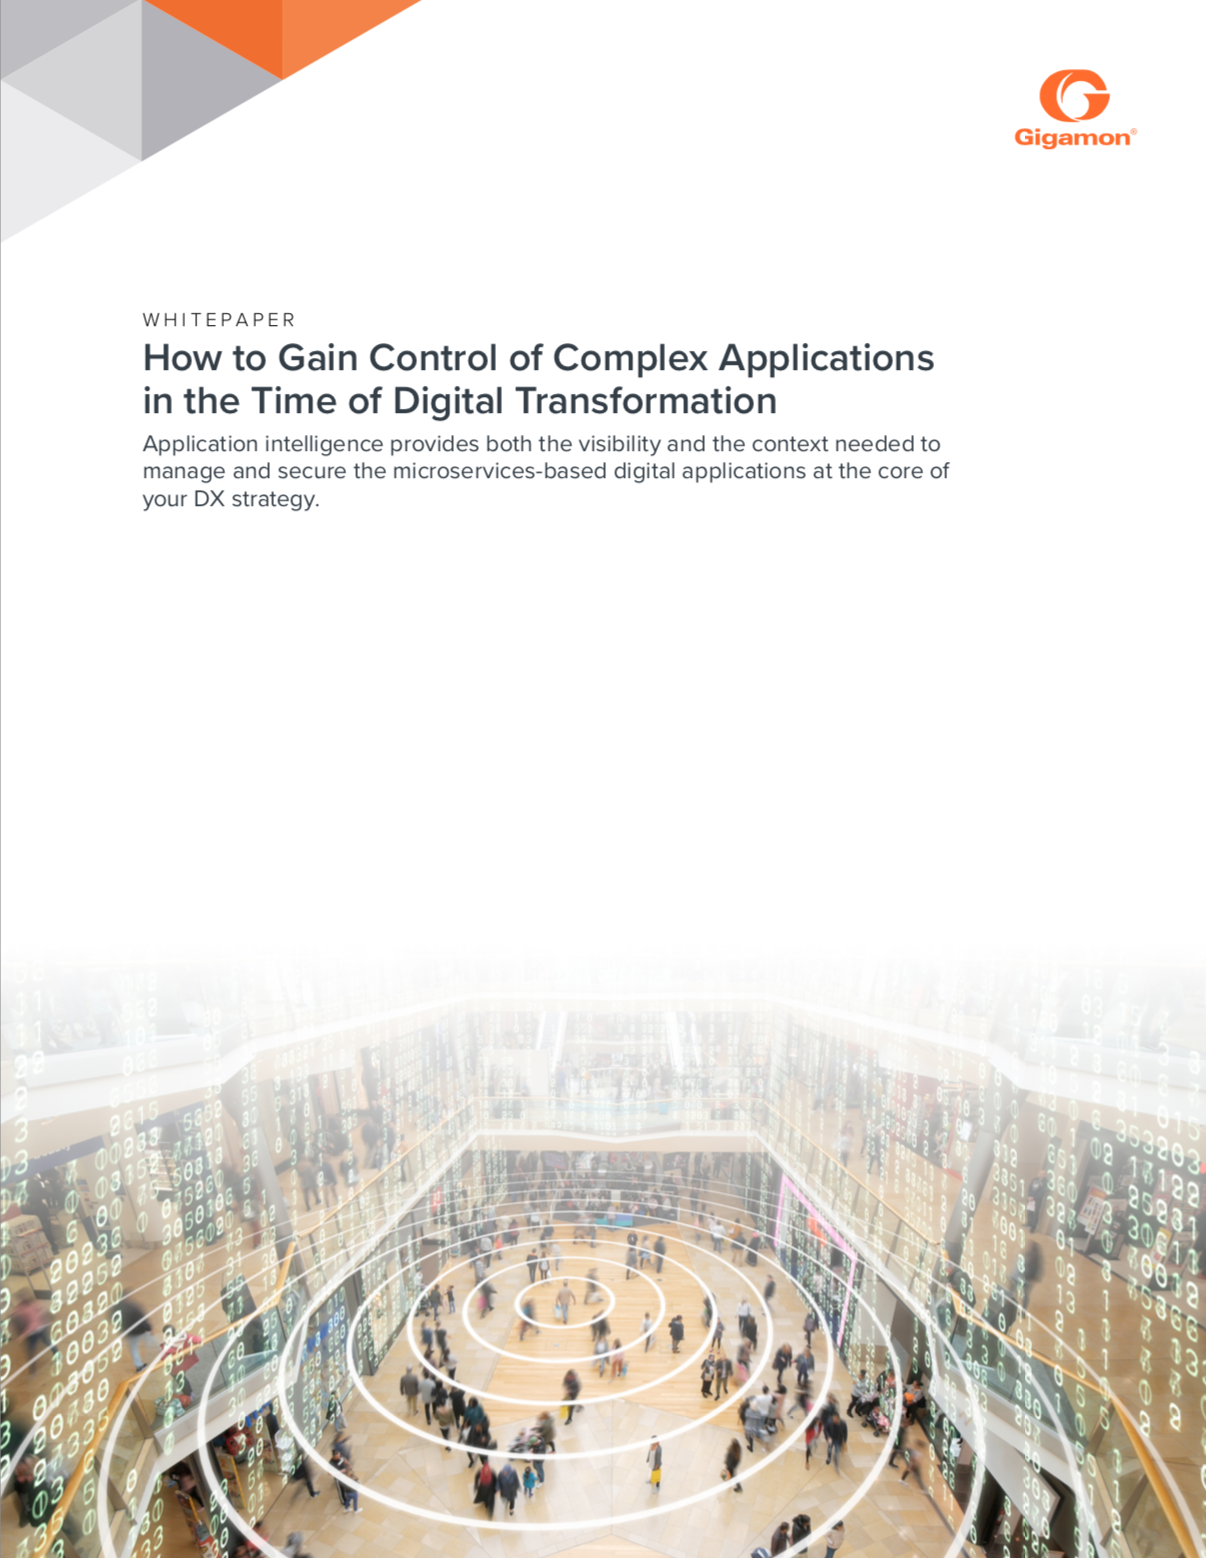 How to Gain Control of Complex Applications in the Time of Digital Transformation